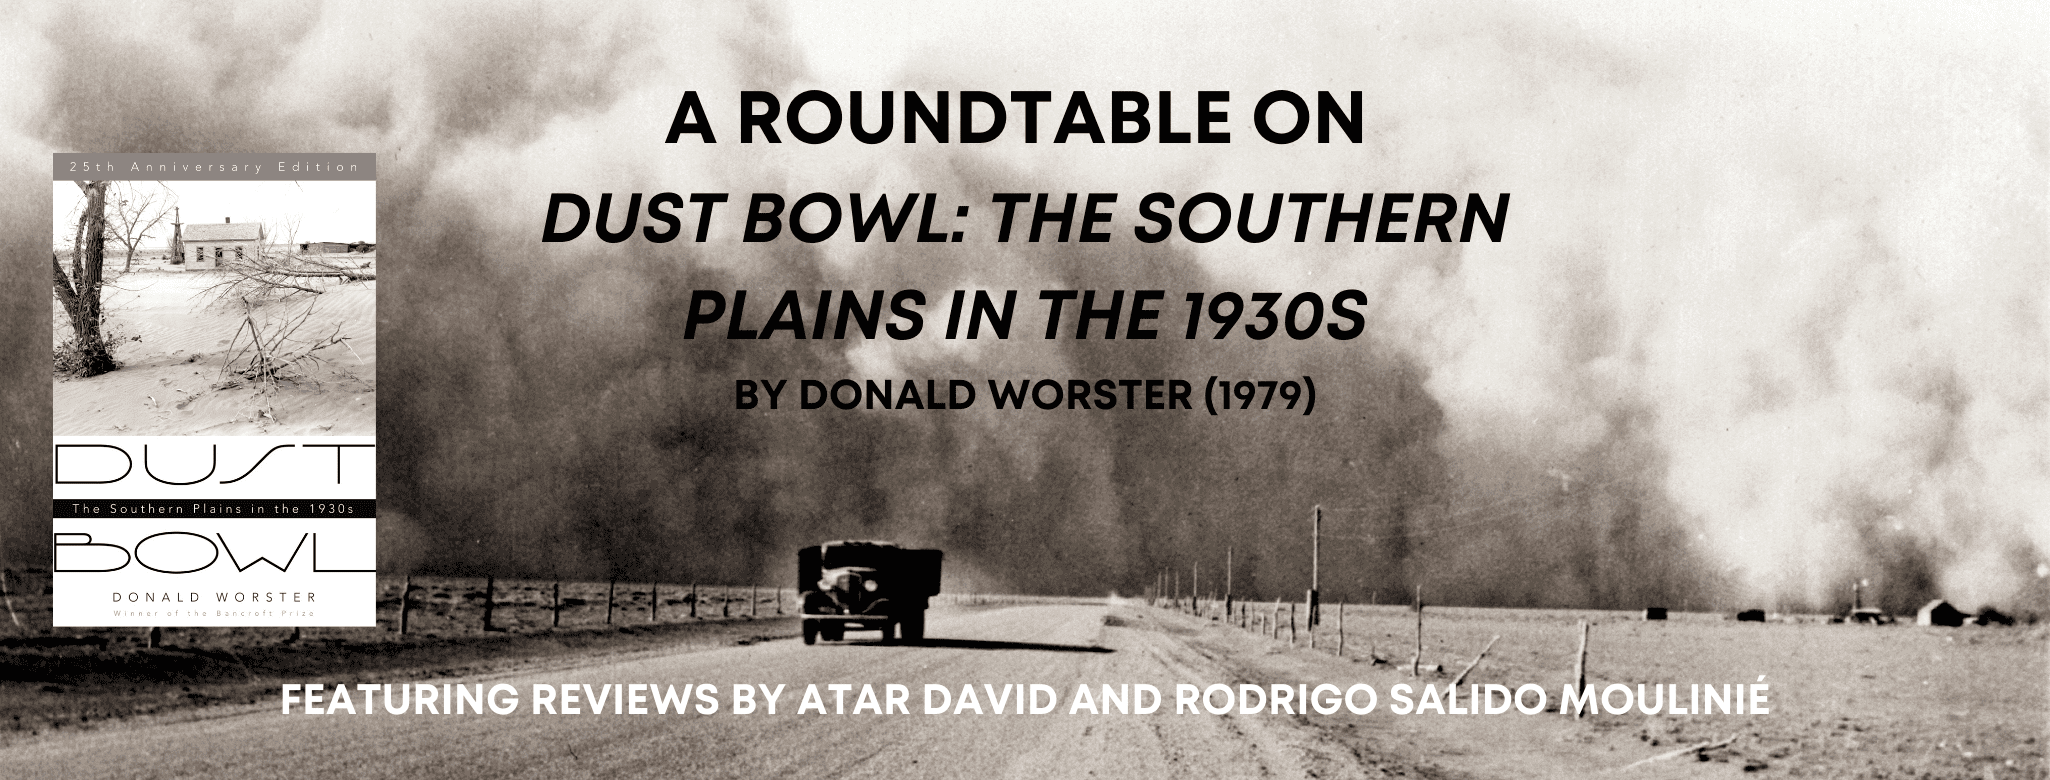 IHS Climate in Context Roundtable Book Review: Dust Bowl: The Southern  Plains in the 1930s (1979) by Donald Worster - Not Even Past